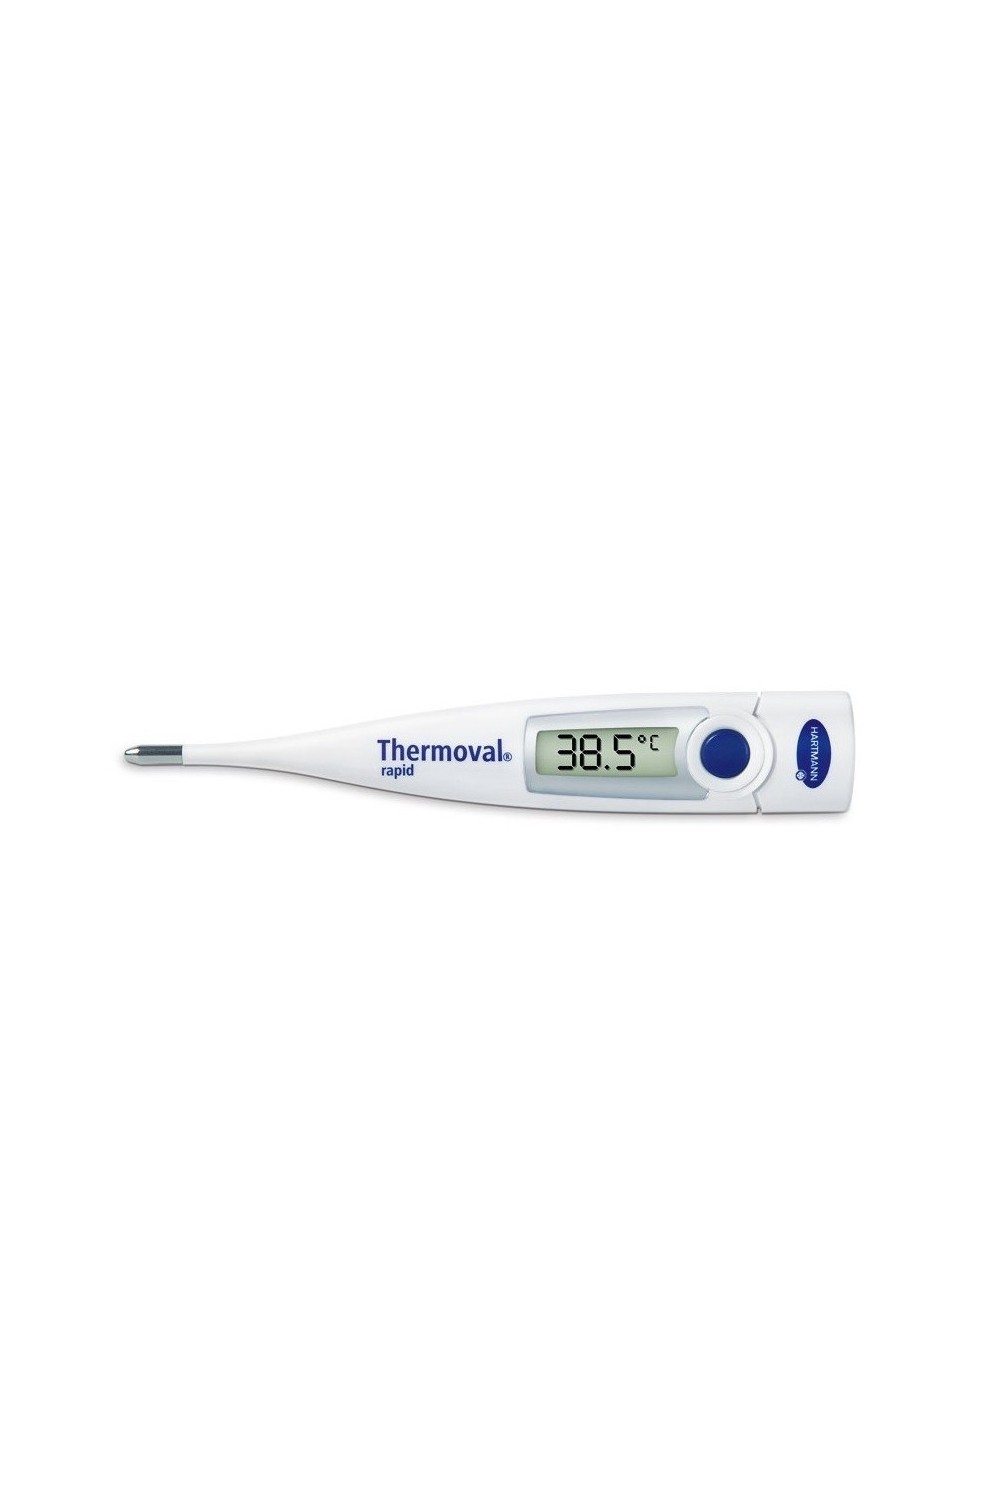 HARTMANN - Thermoval Rapid Digital Thermometer